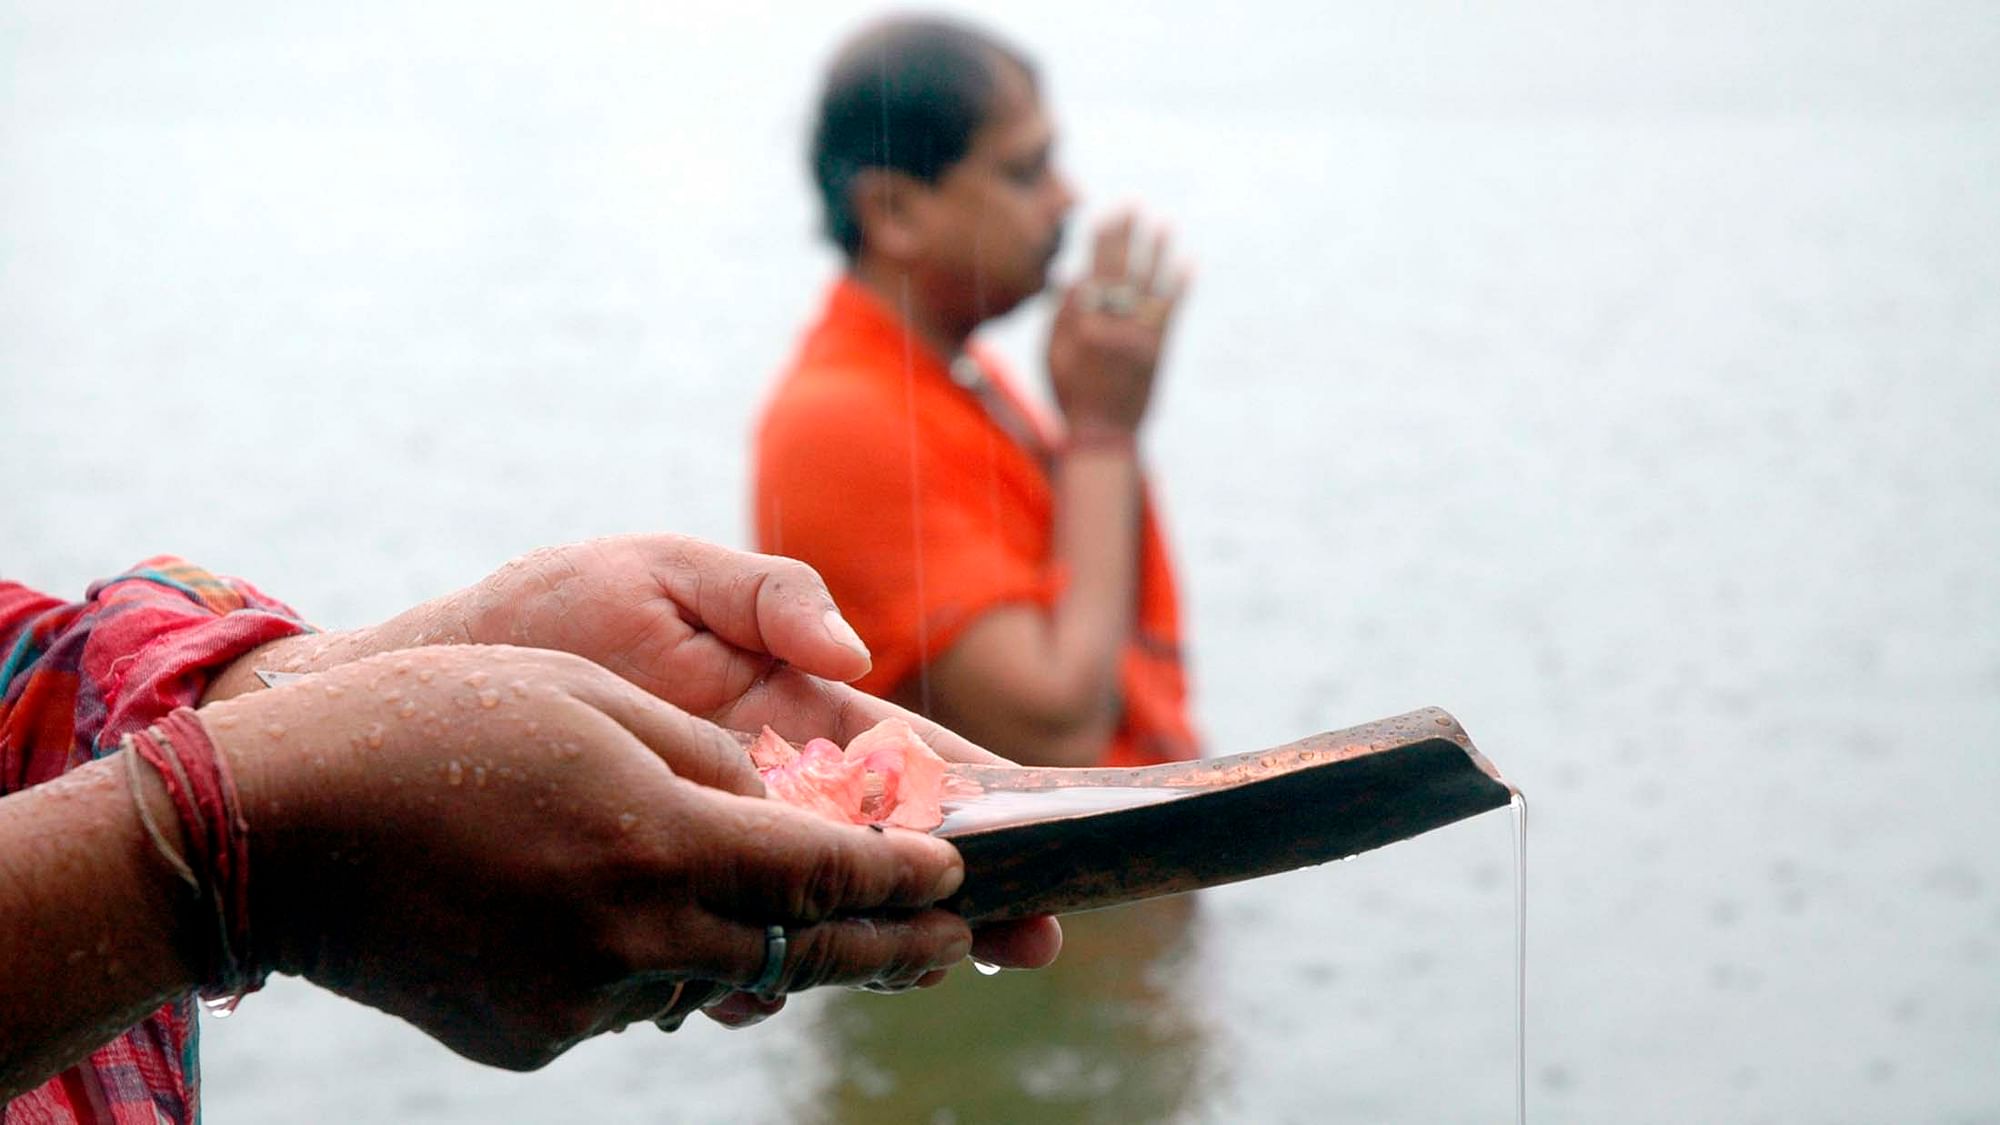 Hindus pray in a pond during the holy day of Mahalaya, the beginning of Pitr-paksh in Agartala. Hindus pray for the souls of their departed ancestors on this day. (Photo: Reuters)